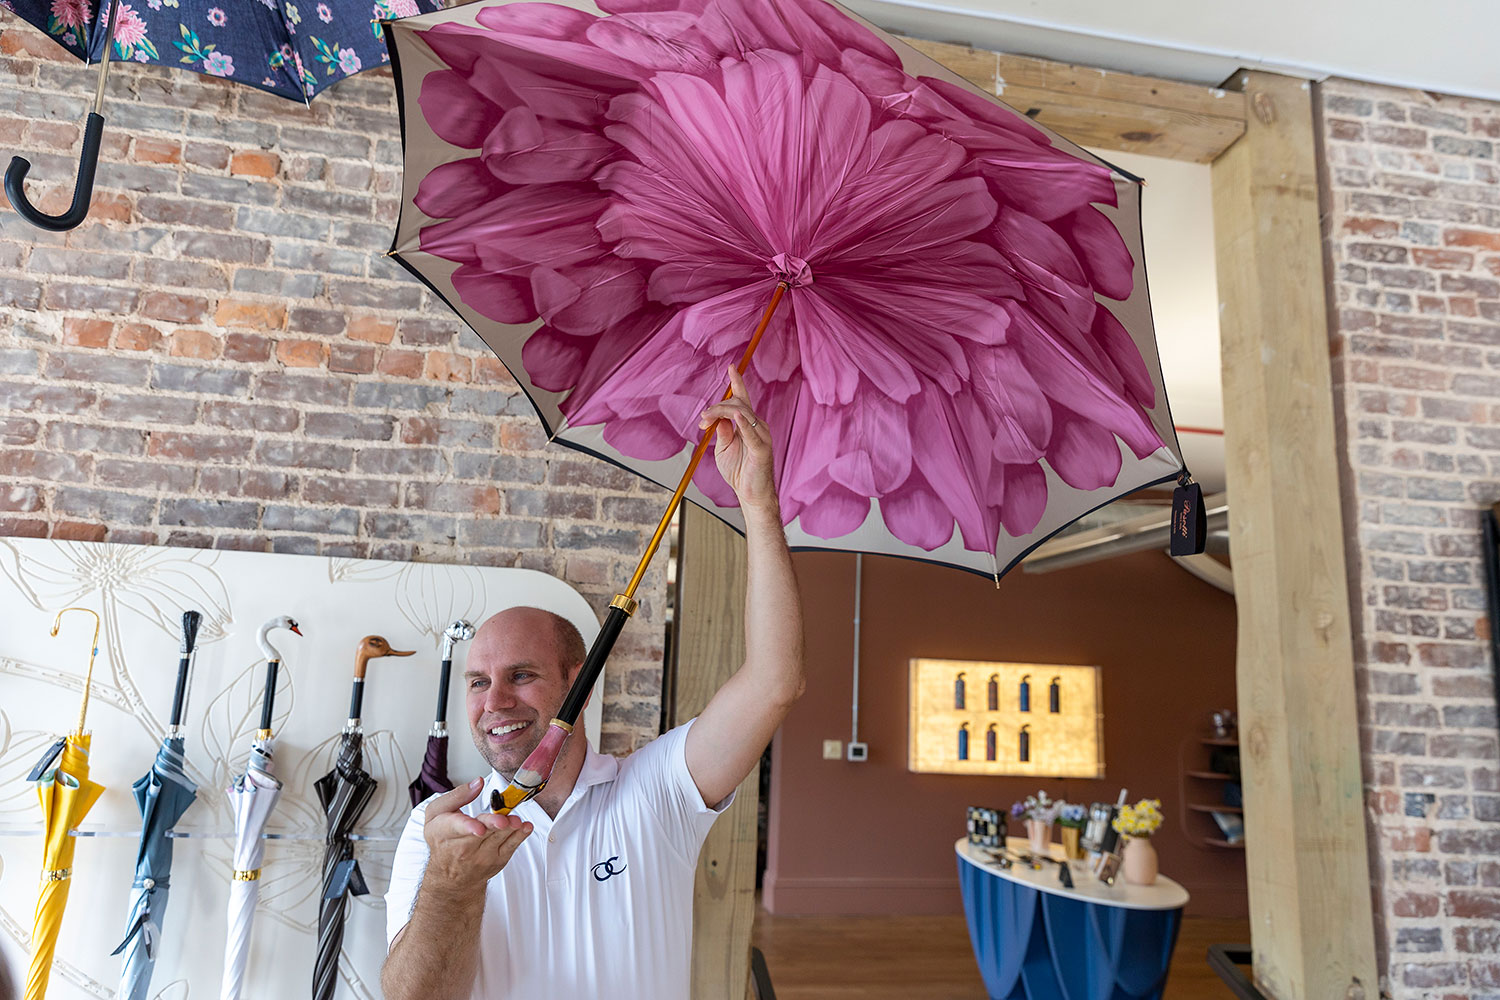 Co-owner Robert Buhler shows off a collection of handcrafted designer umbrellas in the gift shop.